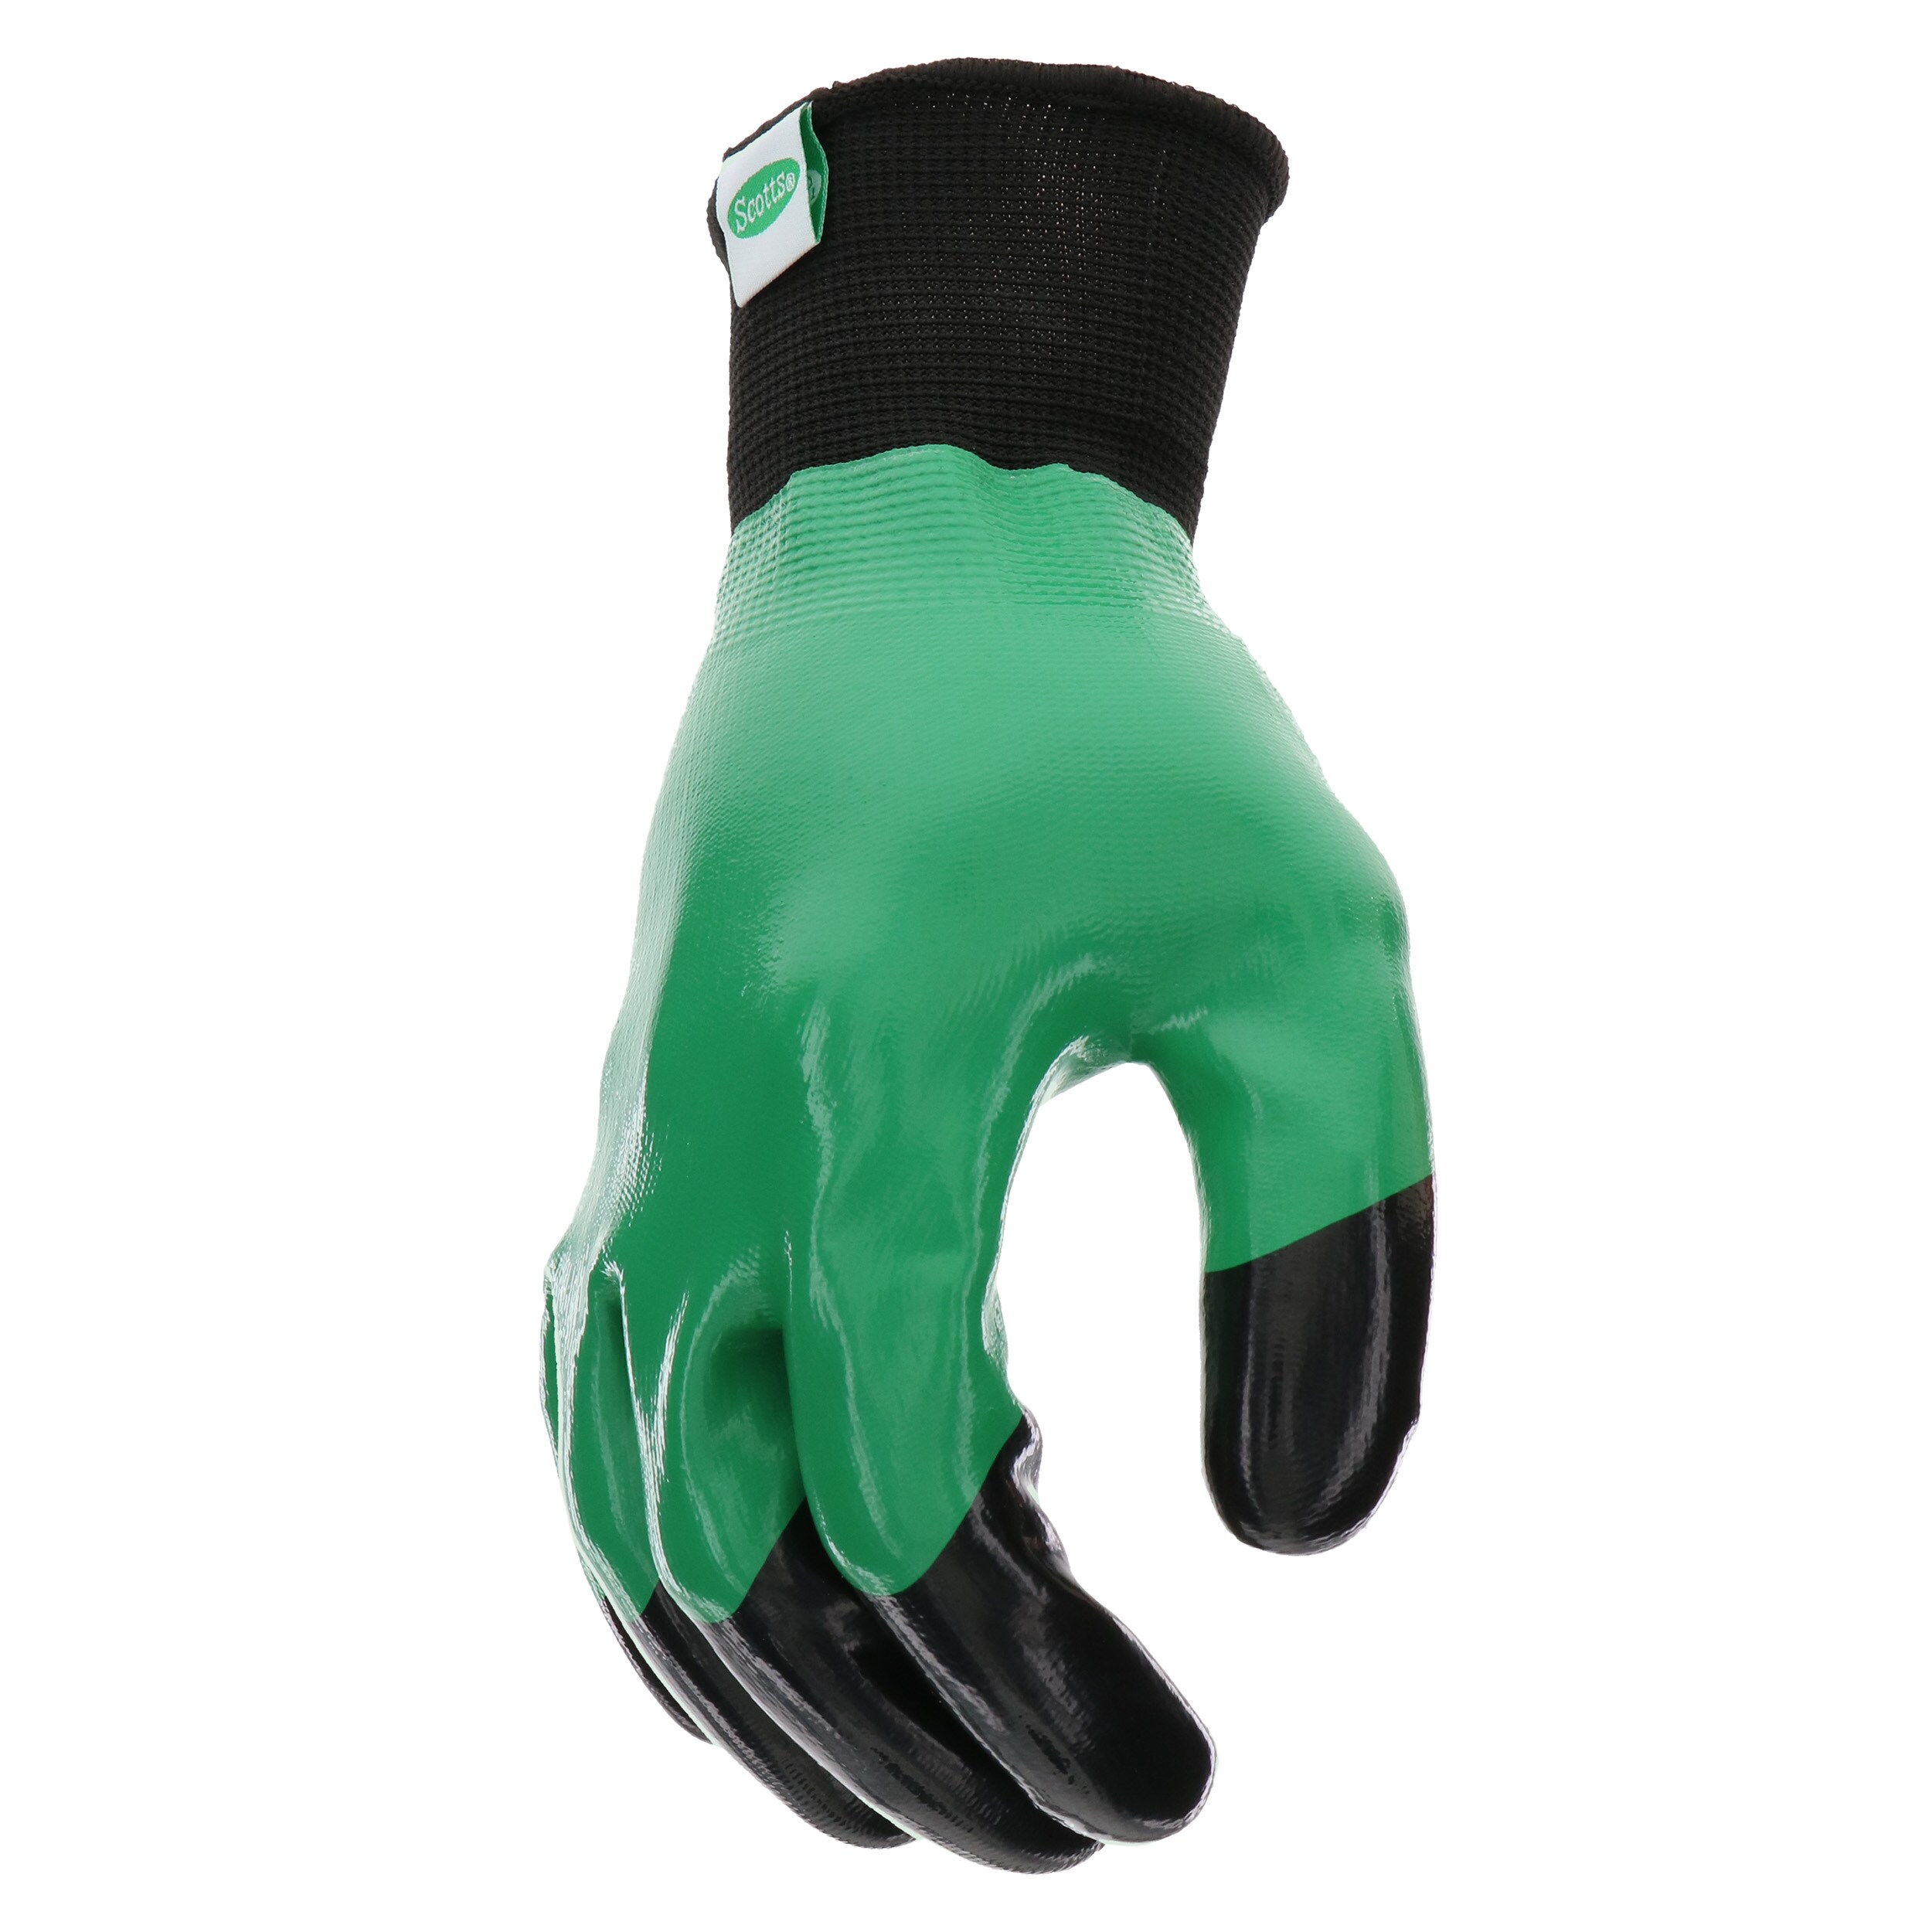 Scotts Nitrile Dipped Work Gloves with TPR, 1 Pair, SC30603/L